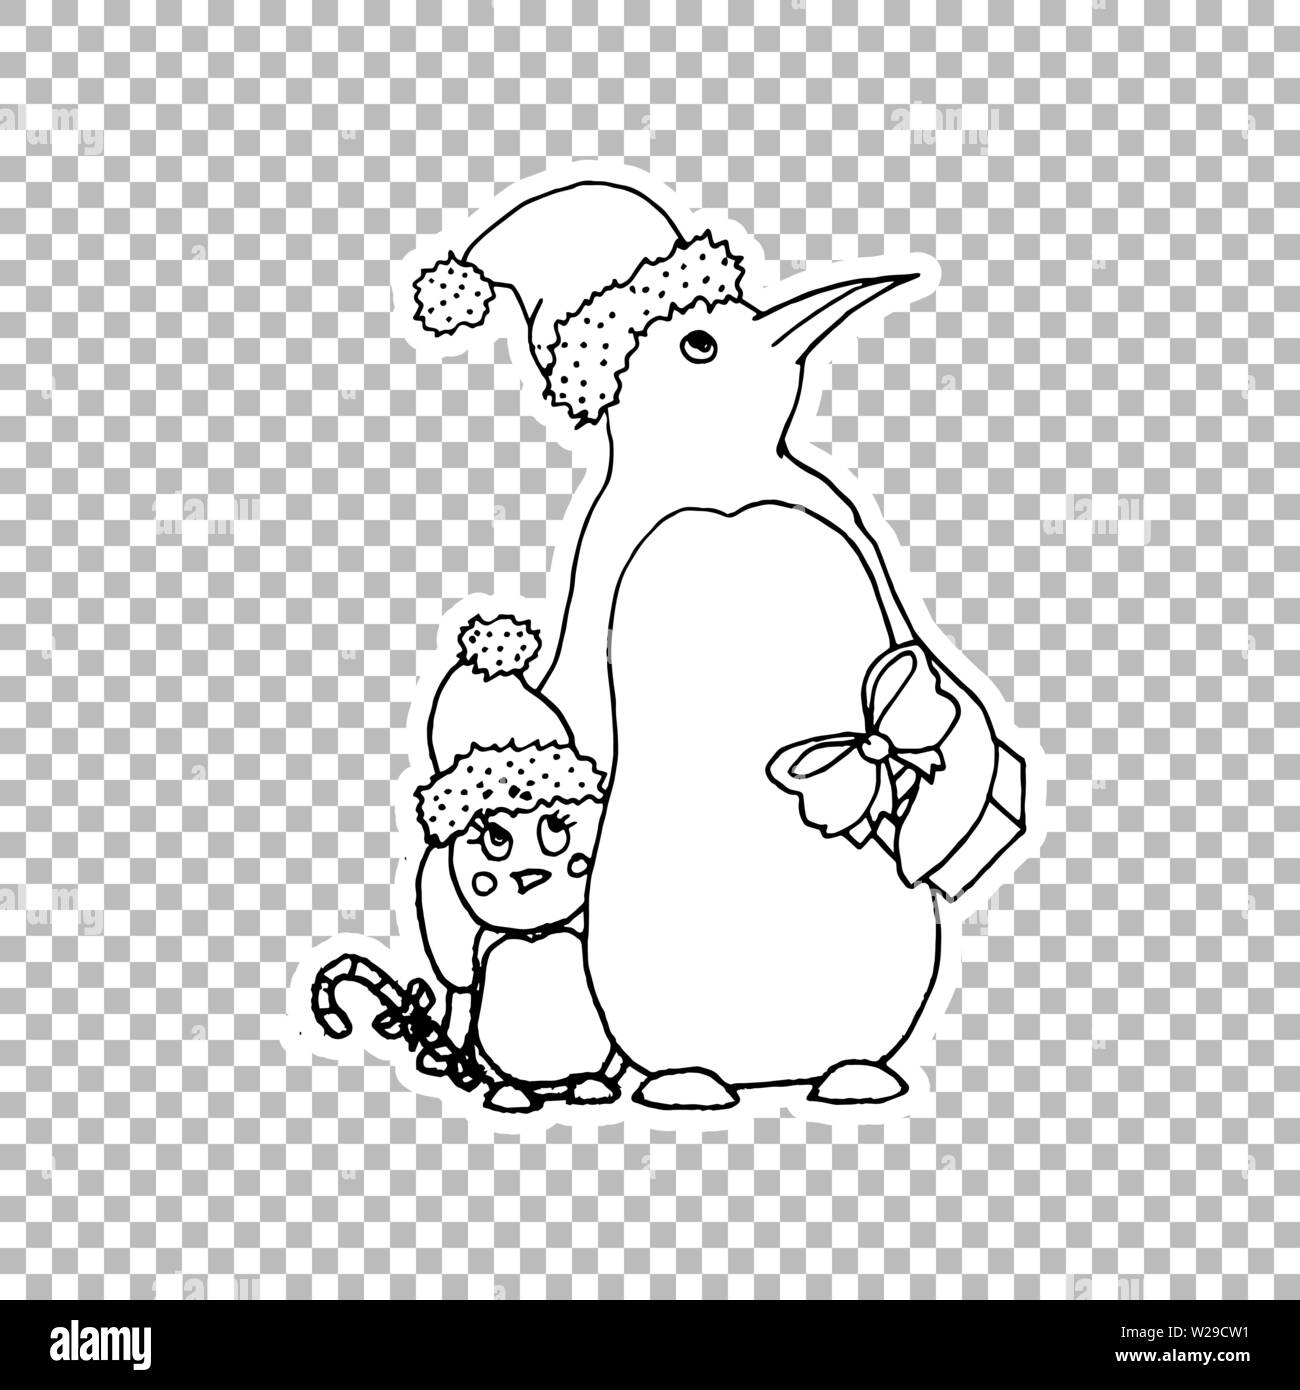 Penguin family Sticker vector linear illustration. Winter hand drawn clipart. Black and white sticker on transparent background. Christmas, New Year d Stock Vector